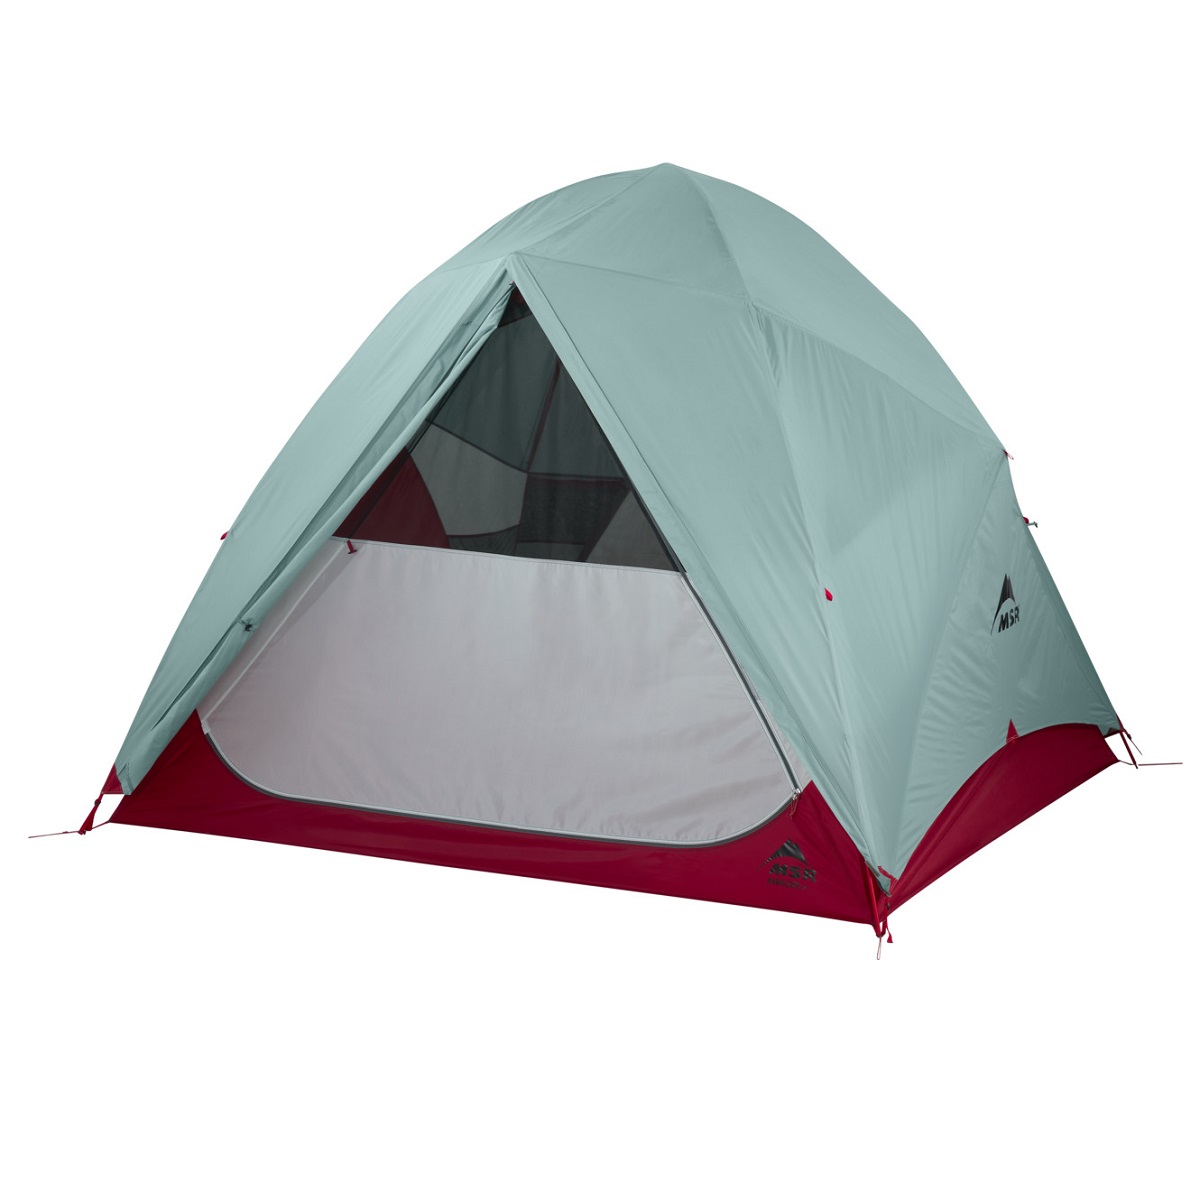 MSR Habiscape 6 Tent - Rear Fly Open